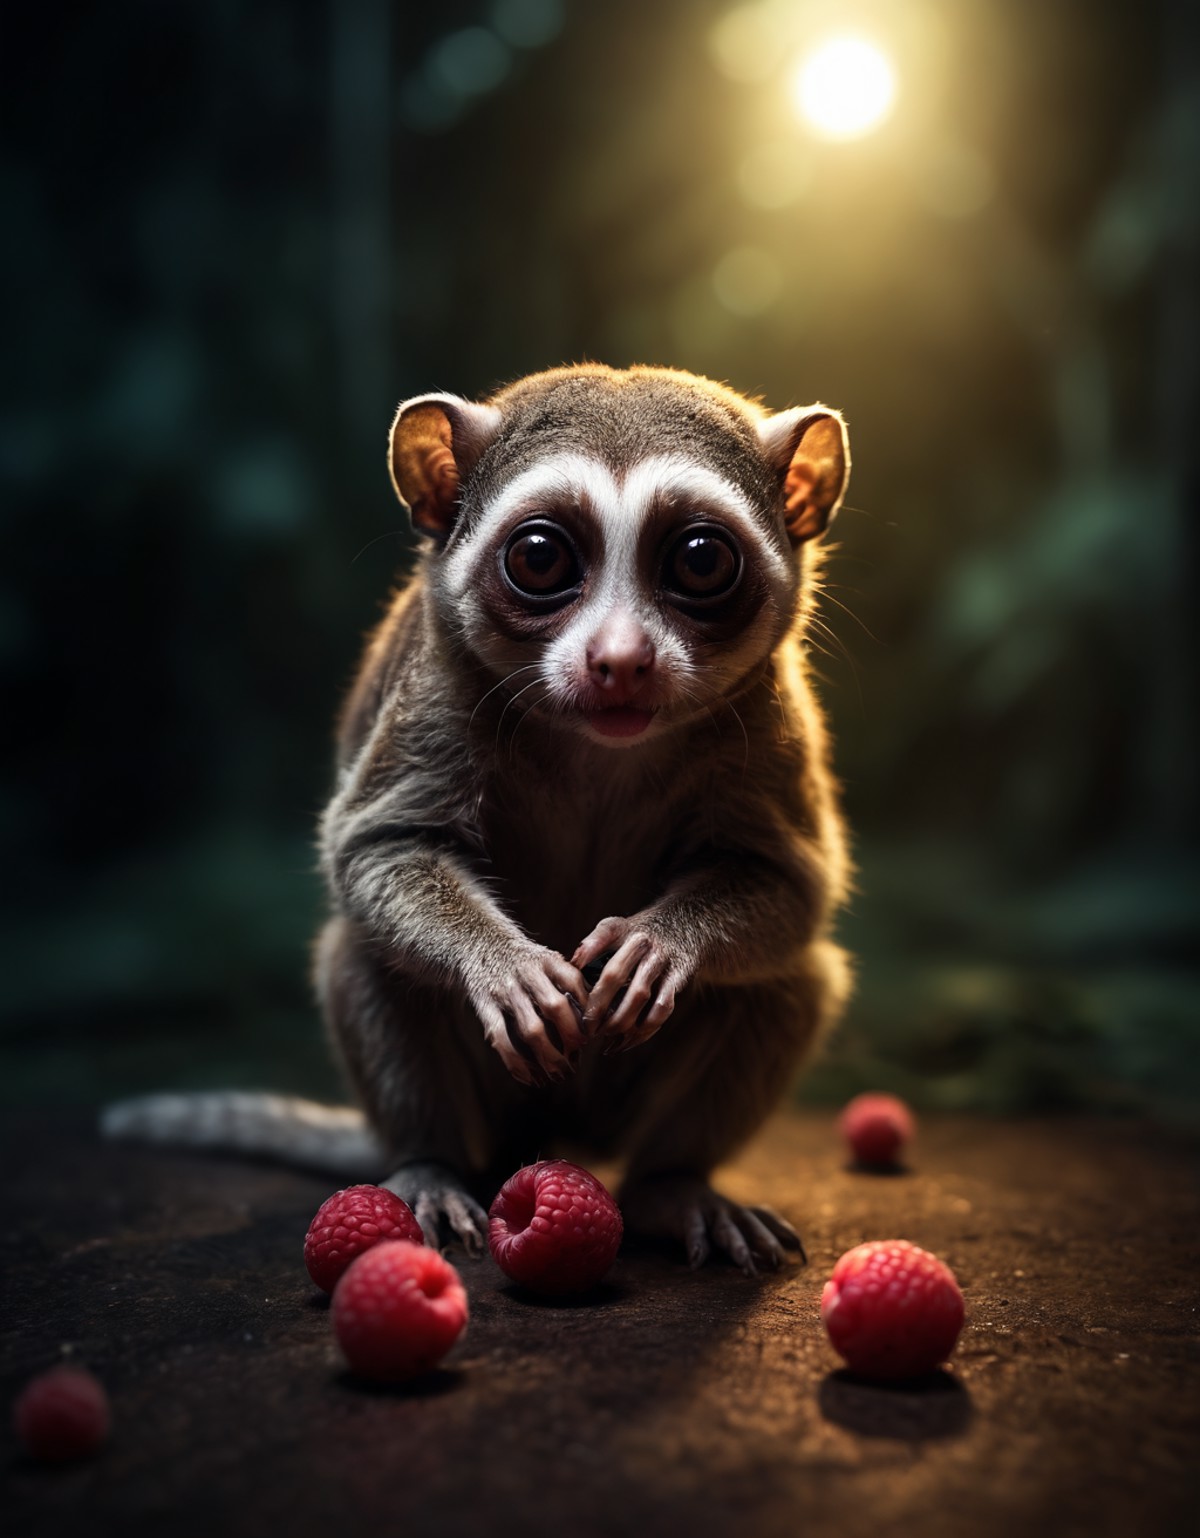 The scene depicts a wild Slow Loris, with the speed of its motion leaving behind traces. The animal's gaze is focused and ...